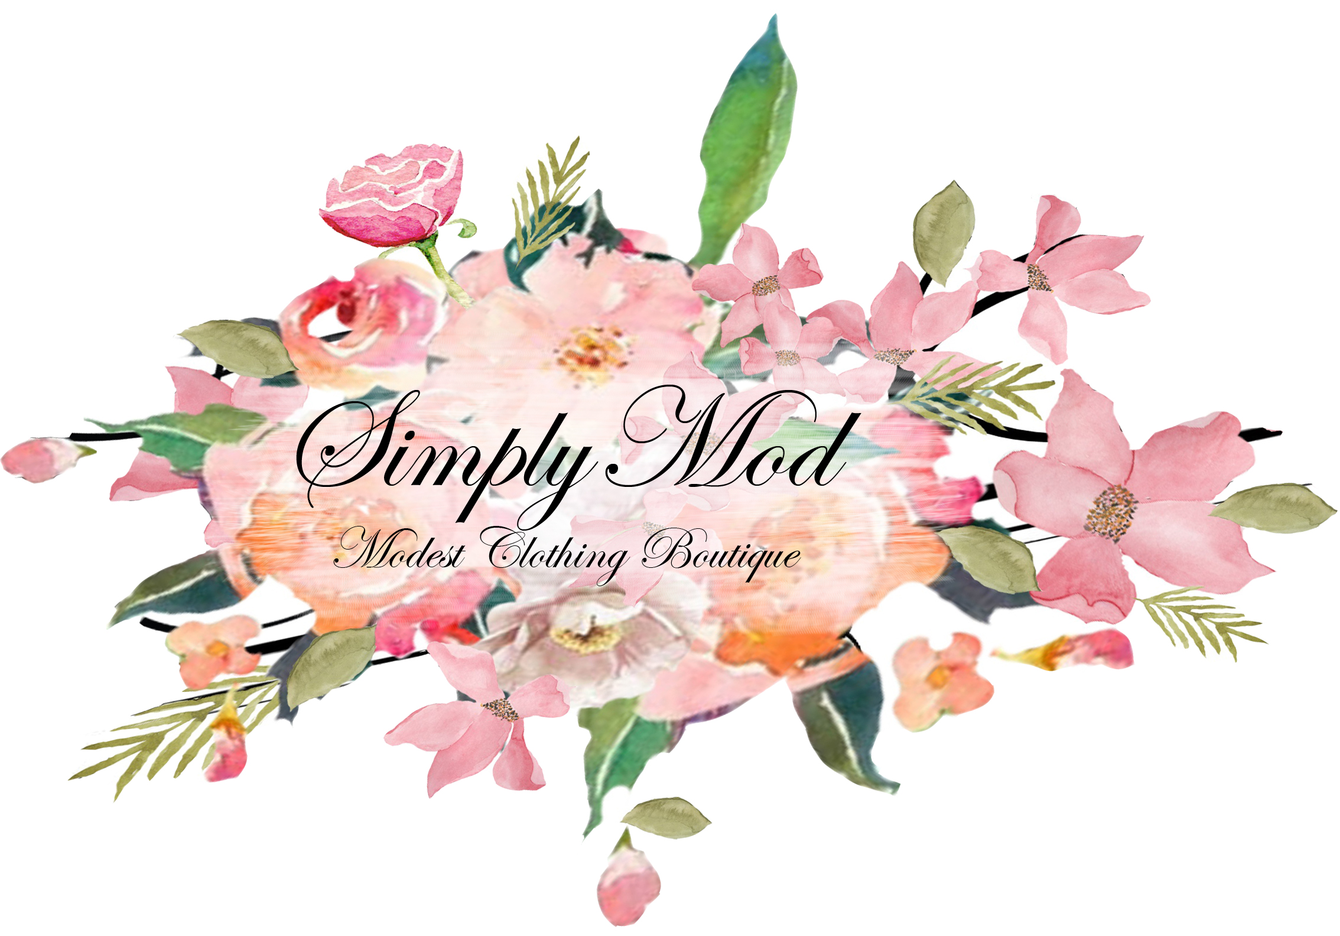 Simply Mod - Modest Clothing Boutique